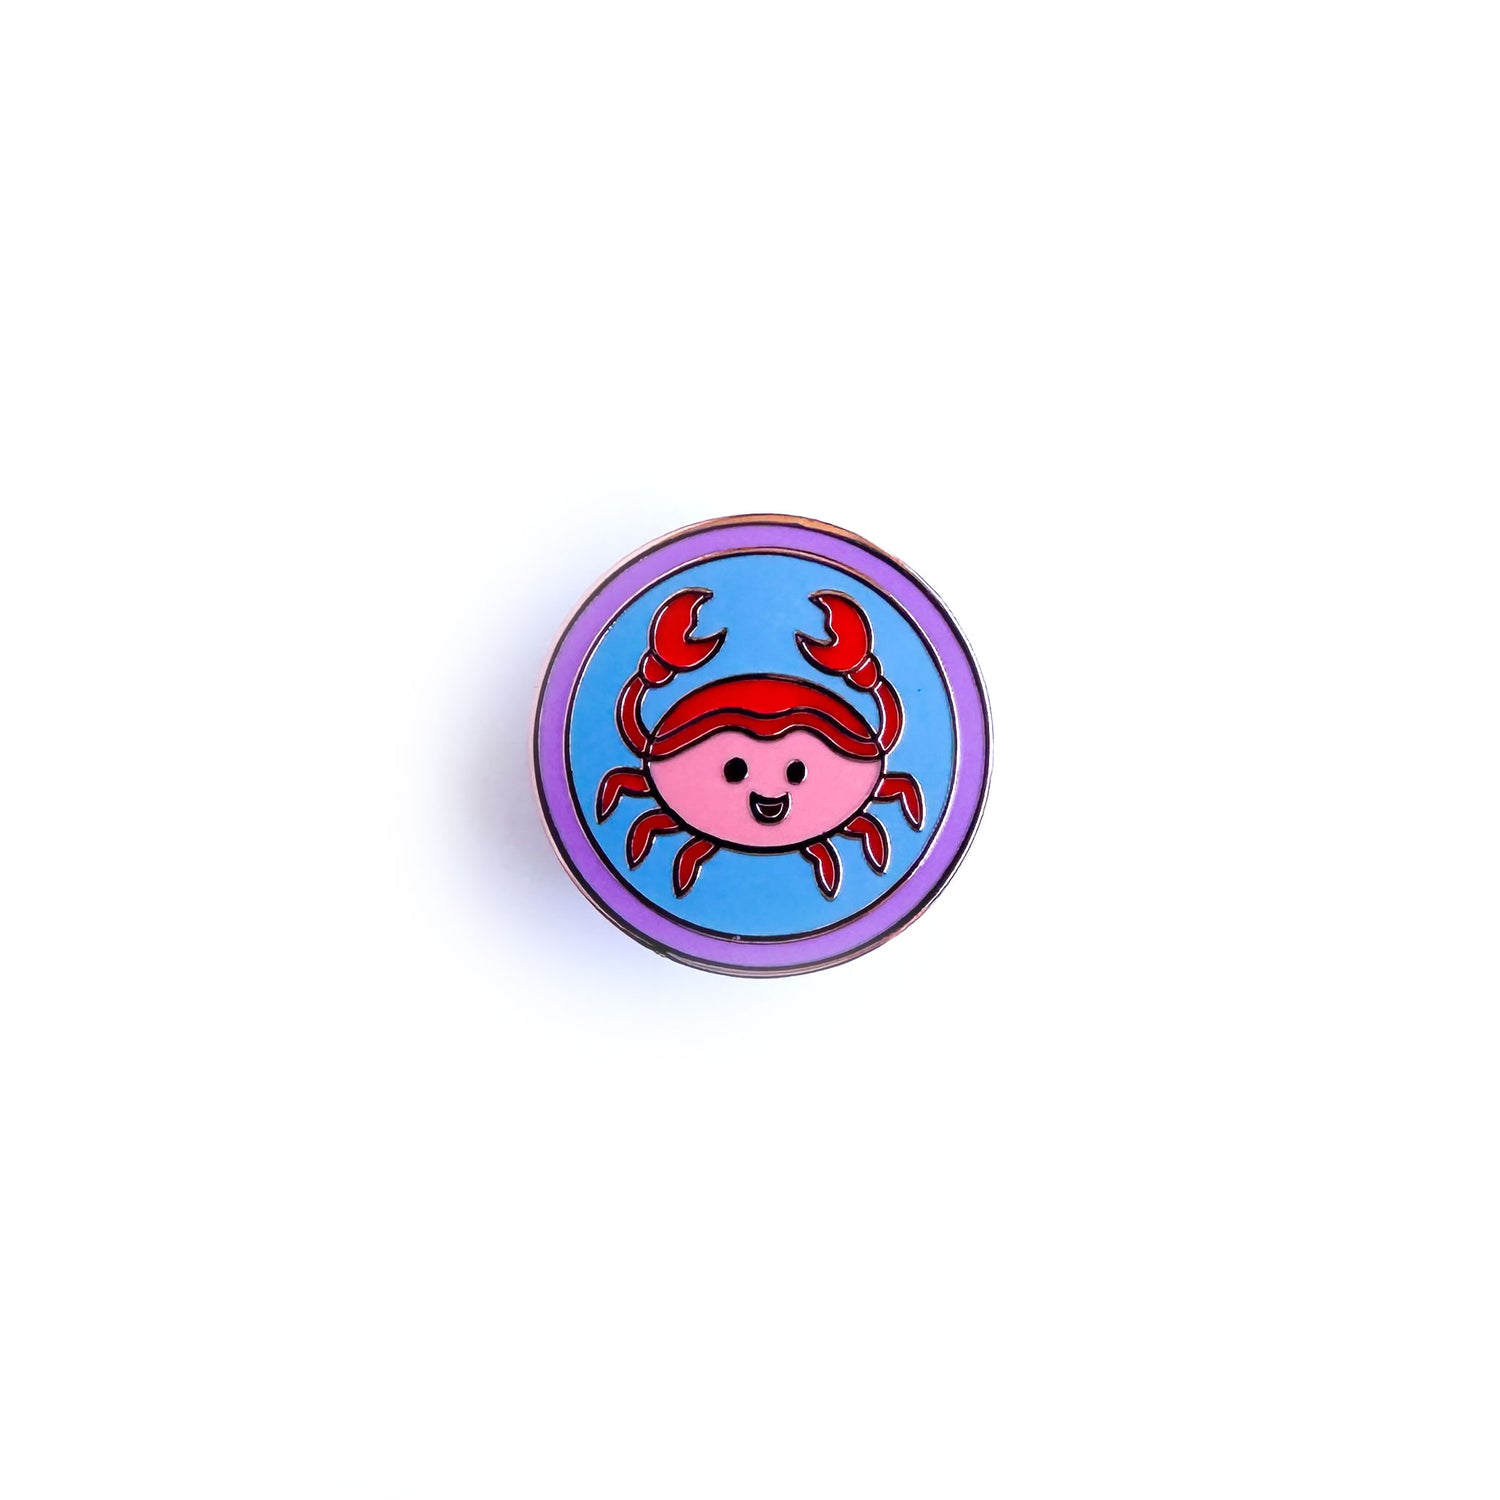 A circular enamel pin with a cute crab design inside to represent the Cancer astrological sign. 